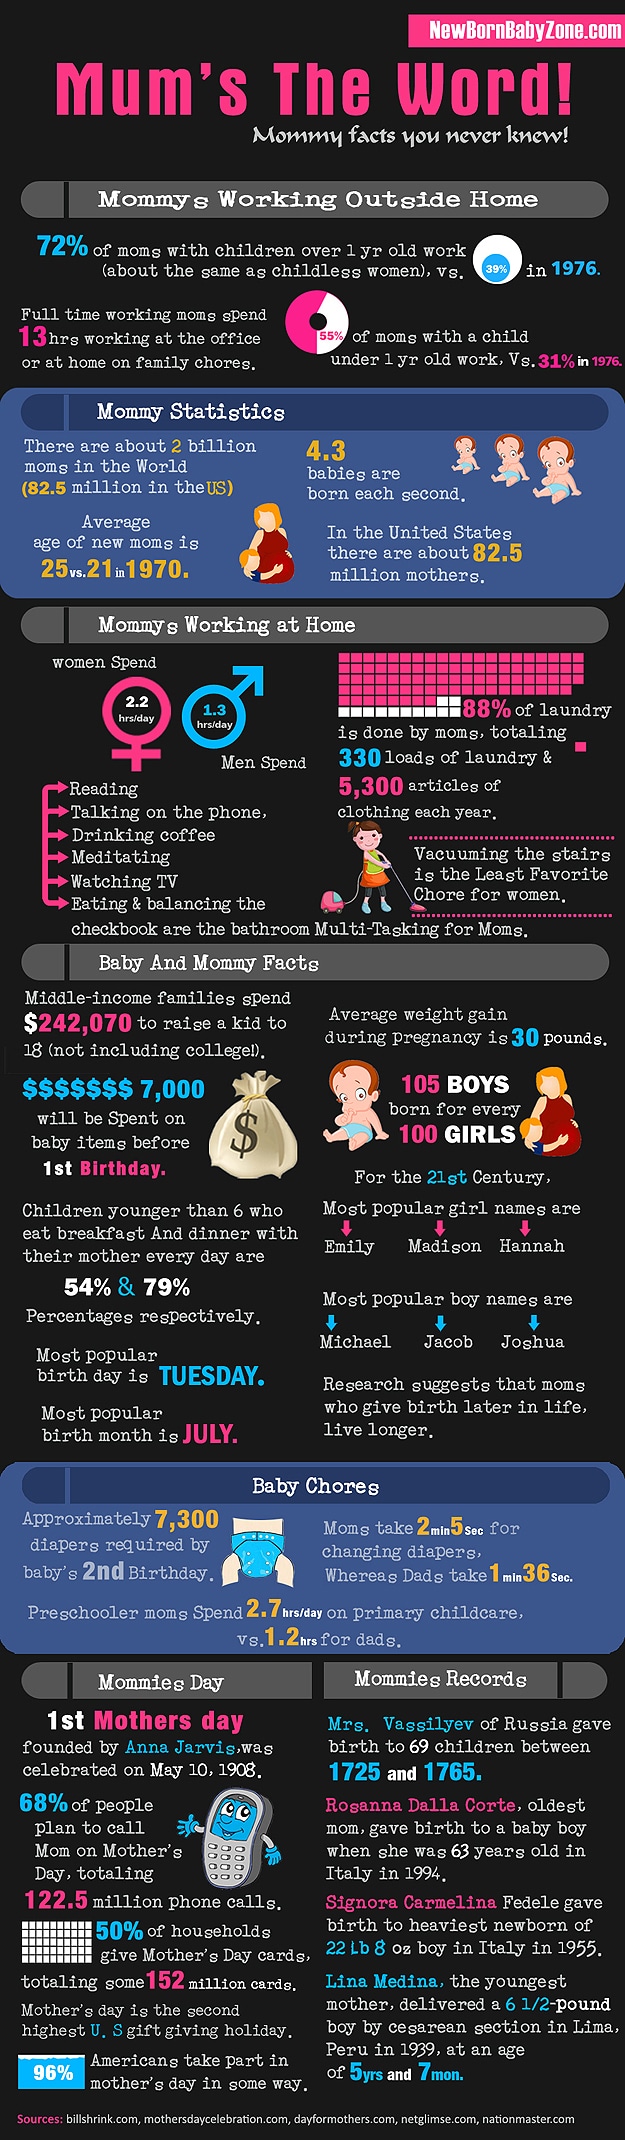 Facts About Moms and Mothers